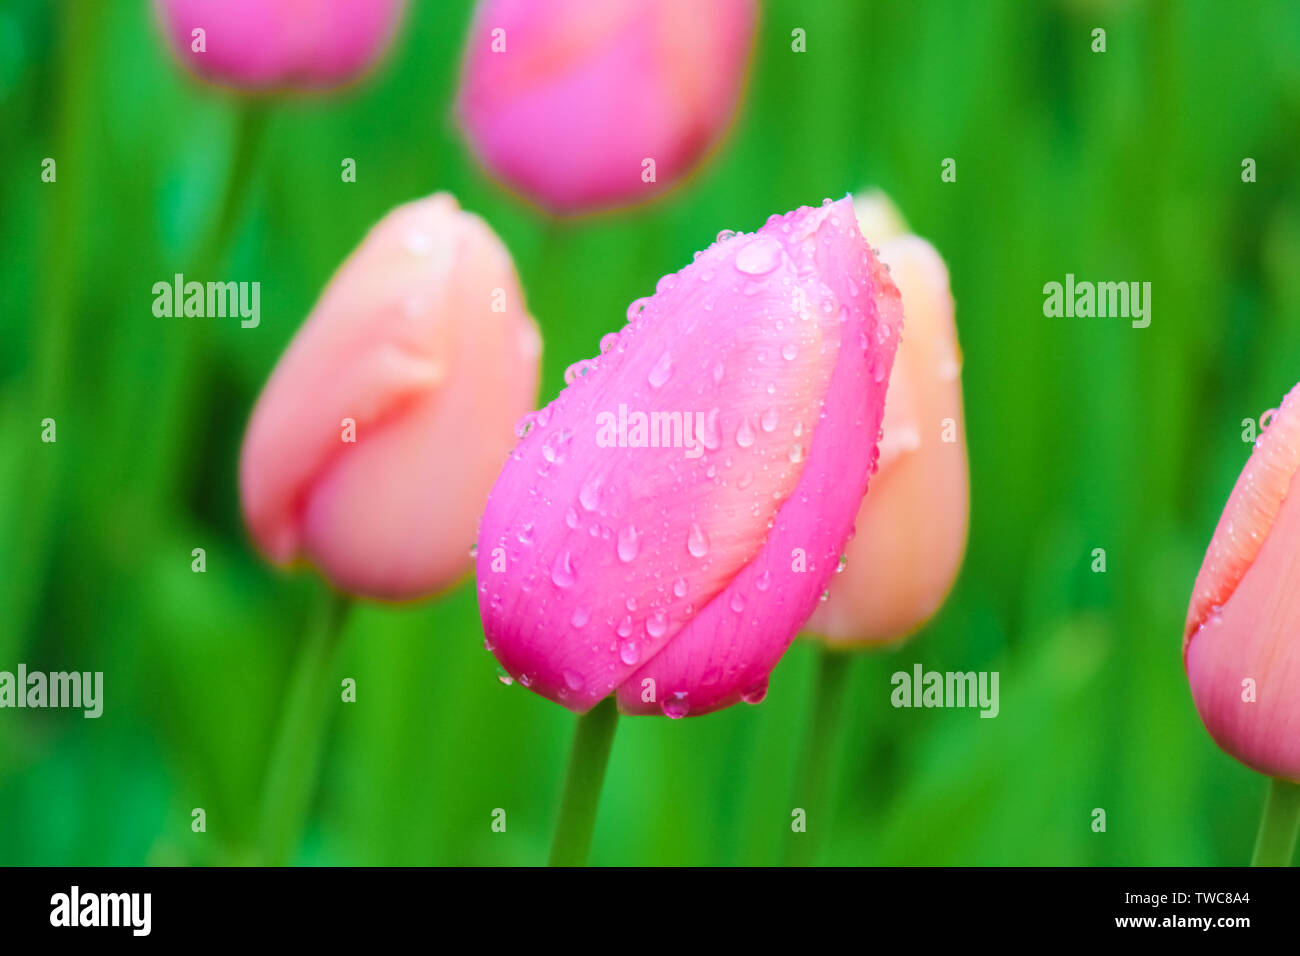 Macro flower picture of young pink tulip with blurred green background. Raindrops, morning dew drops on colorful petals. Holland tulips. Netherlands, Dutch. Beautiful flowers. Stock Photo